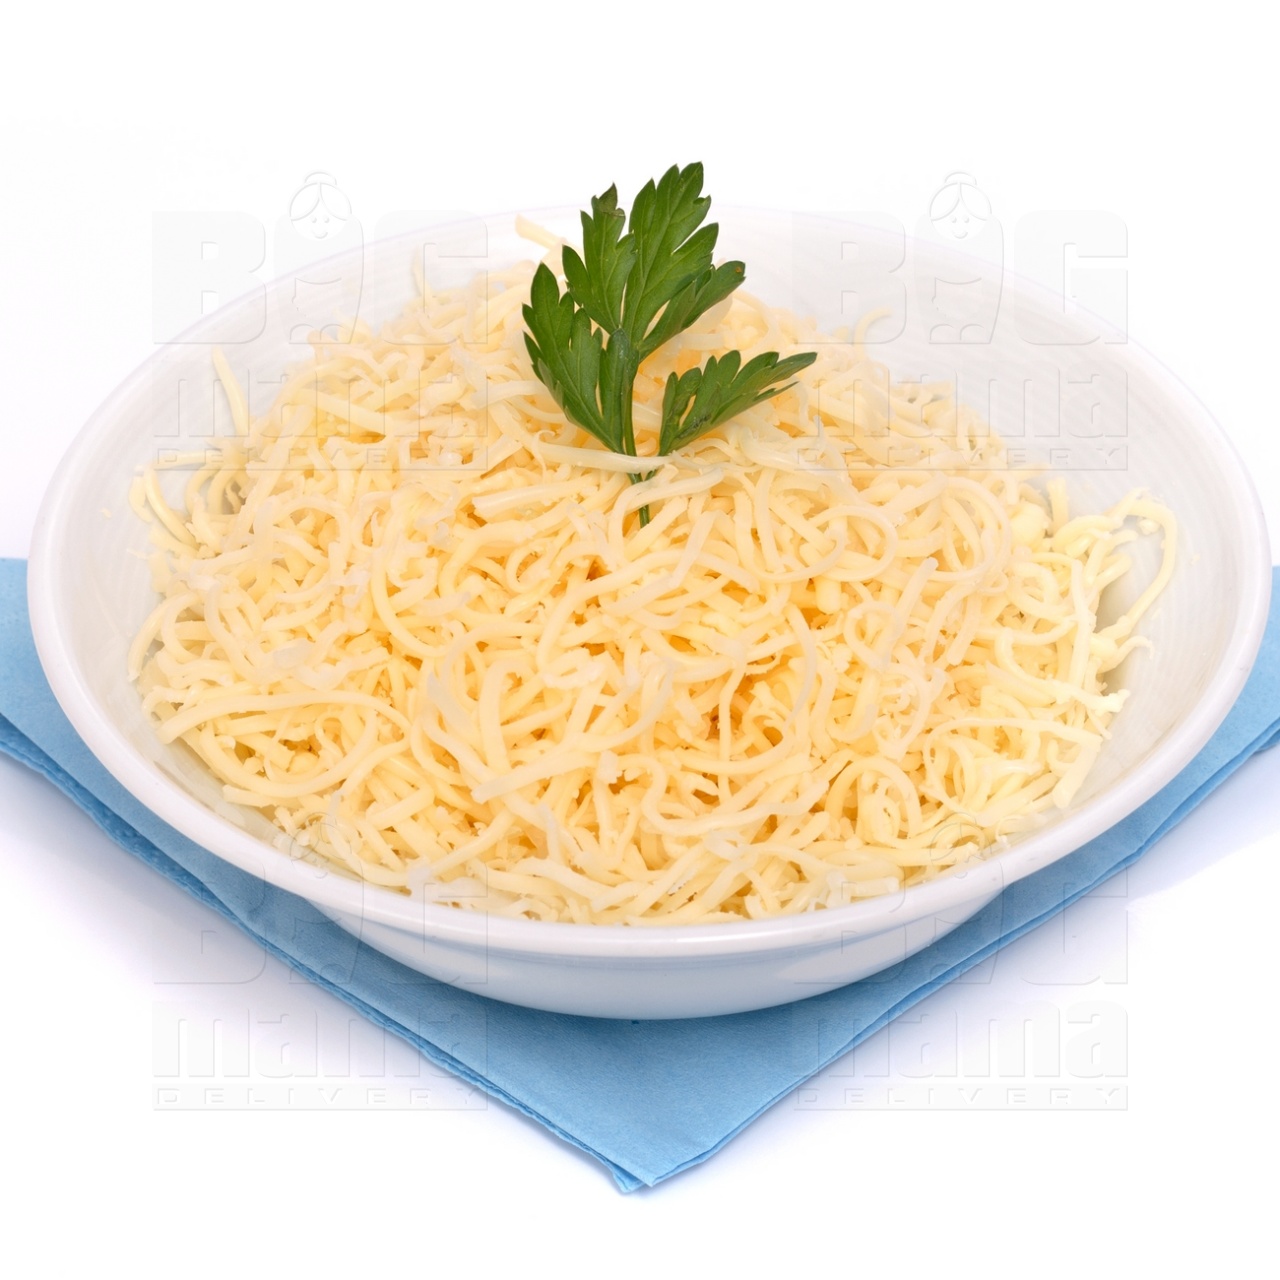 Product #84 image - Grated cheese